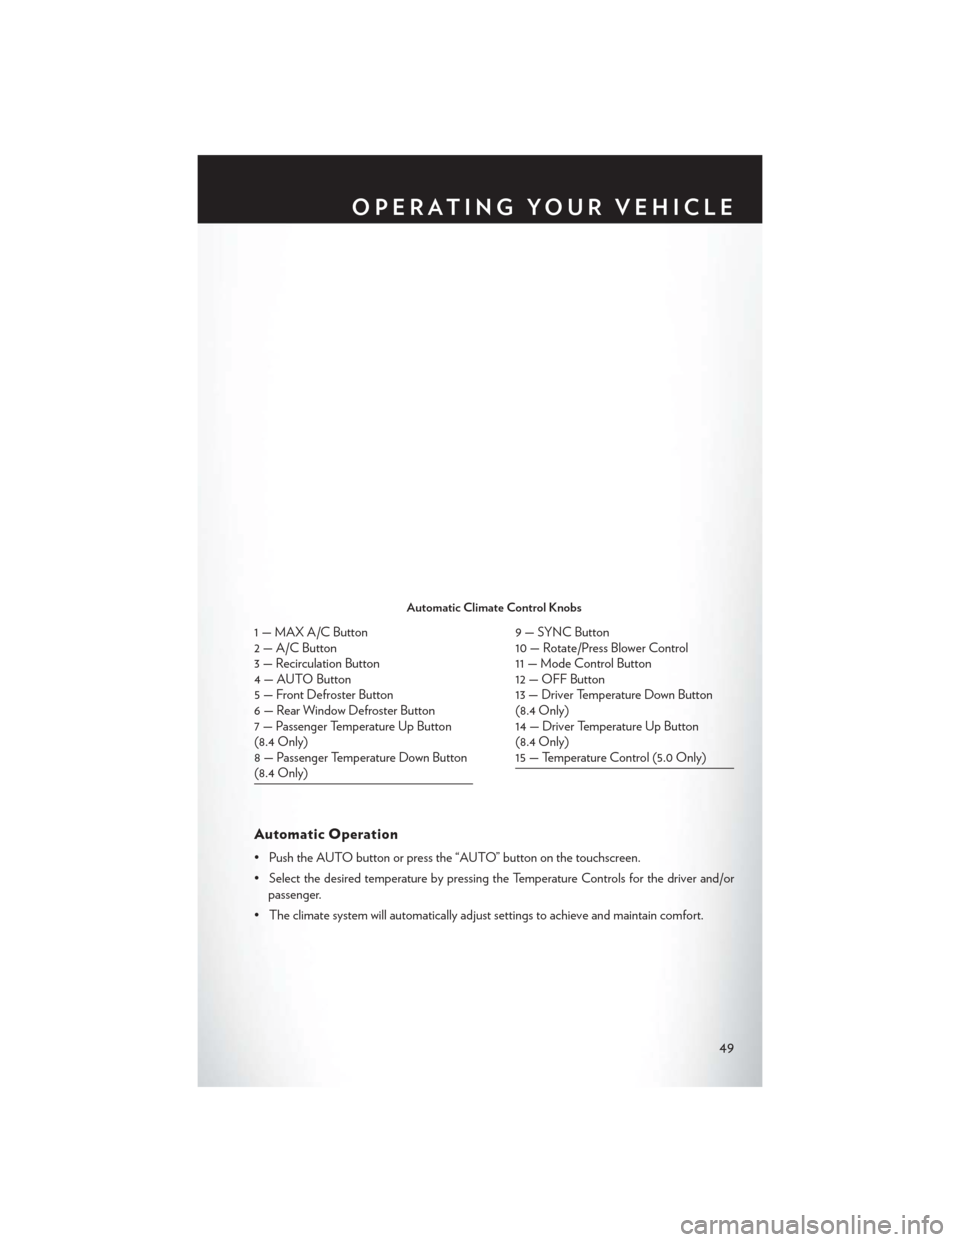 CHRYSLER 200 2015 2.G User Guide Automatic Operation
• Push the AUTO button or press the “AUTO” button on the touchscreen.
• Select the desired temperature by pressing the Temperature Controls for the driver and/orpassenger.
